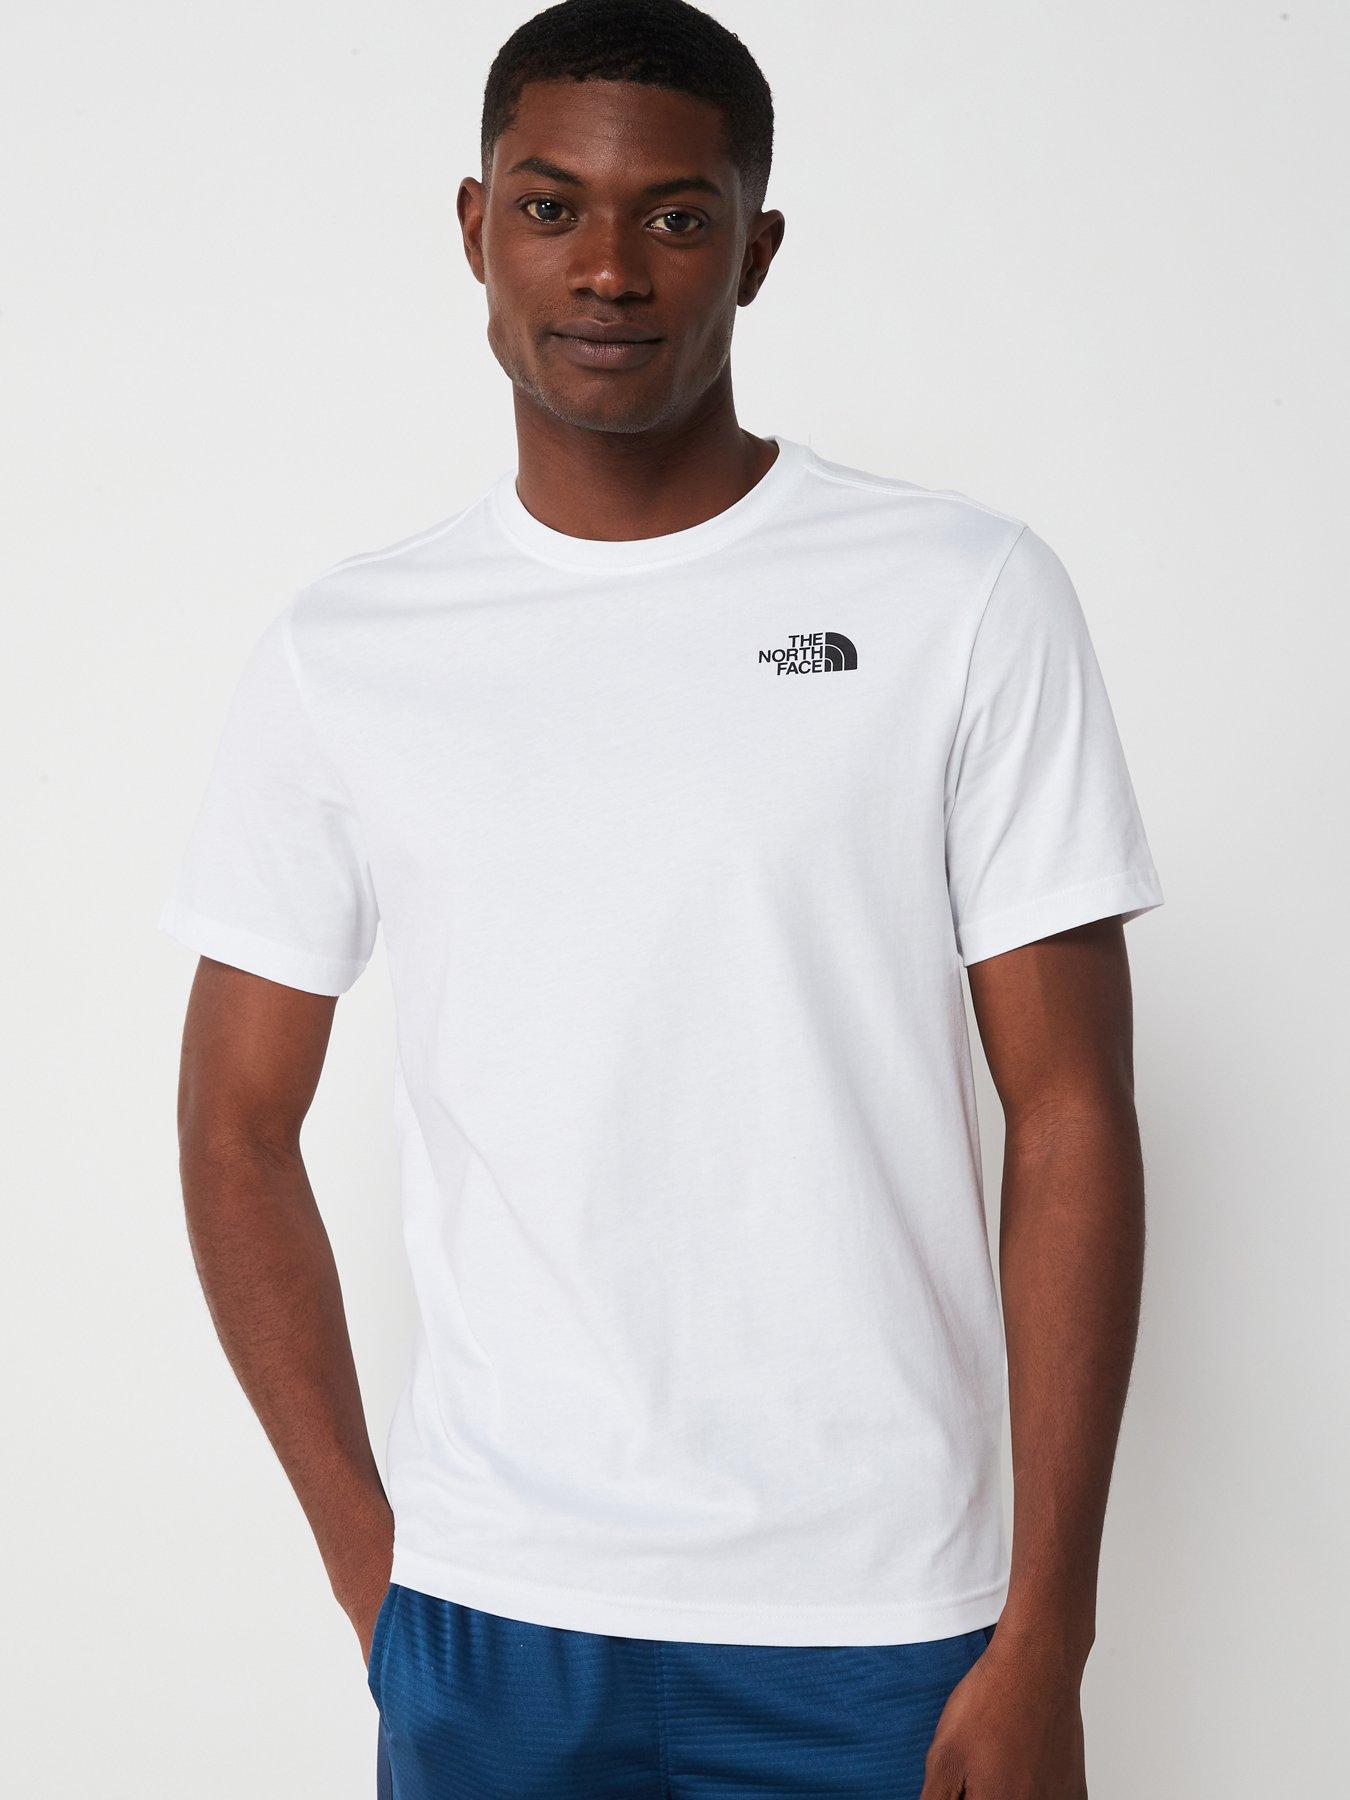 THE NORTH FACE Men's Mountain Outline T-Shirt - White/Black